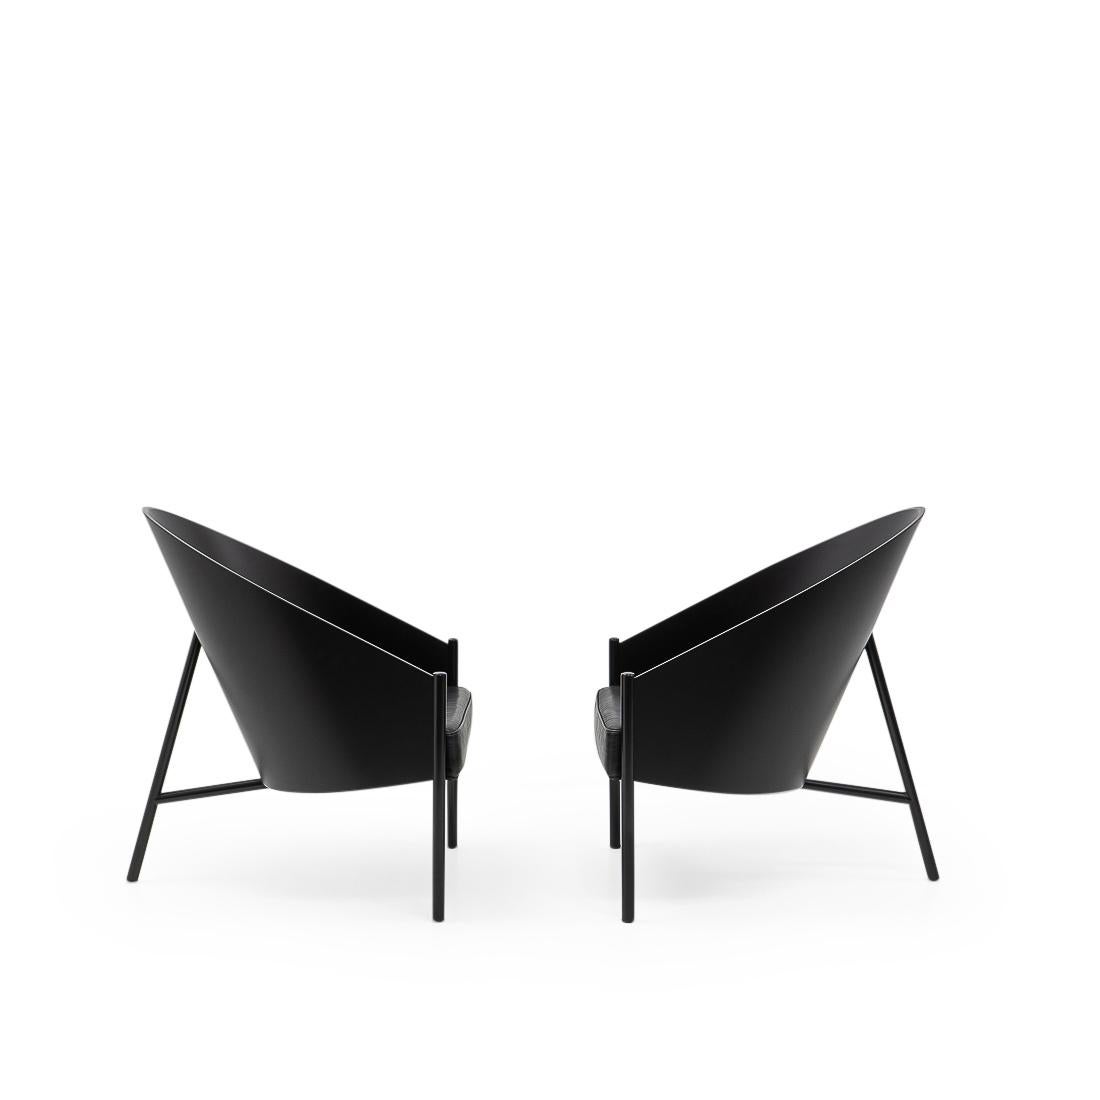 Post-Modern French Design Classic Pratfall Lounge Chairs by P. Starck for Driade, Set of Two For Sale